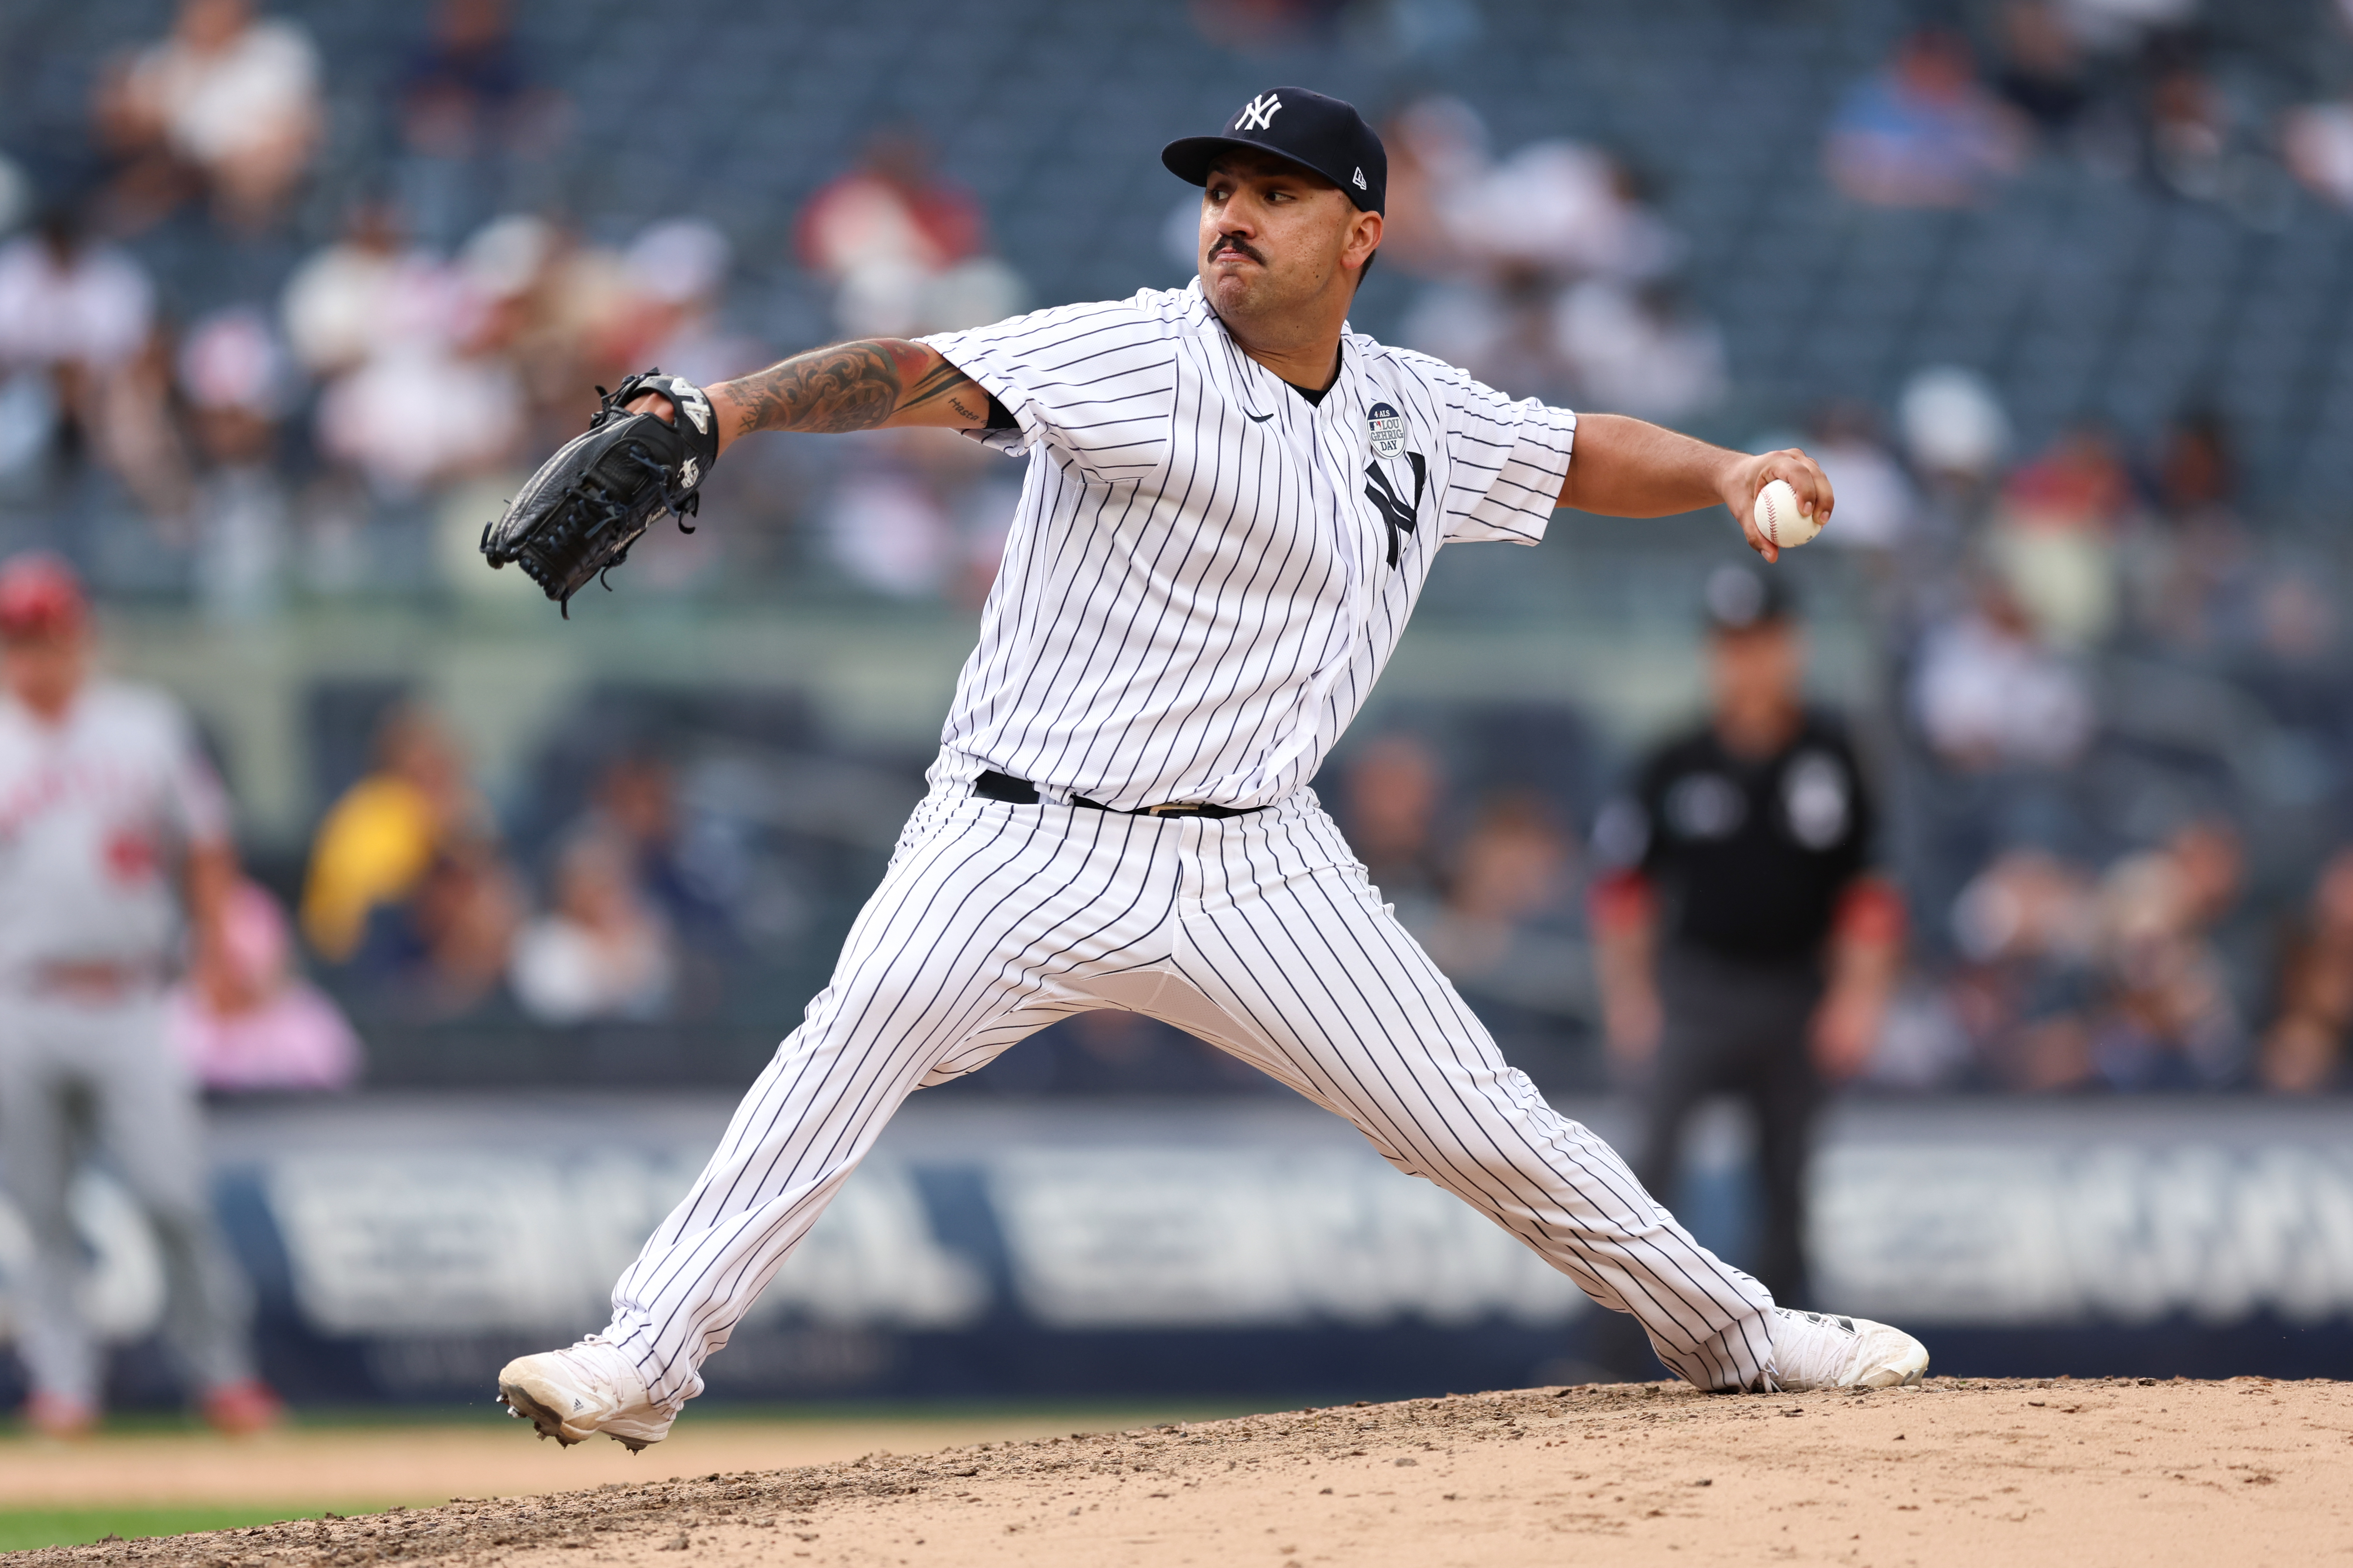 Yankees' Nestor Cortes Addresses Insensitive Remark by Twins